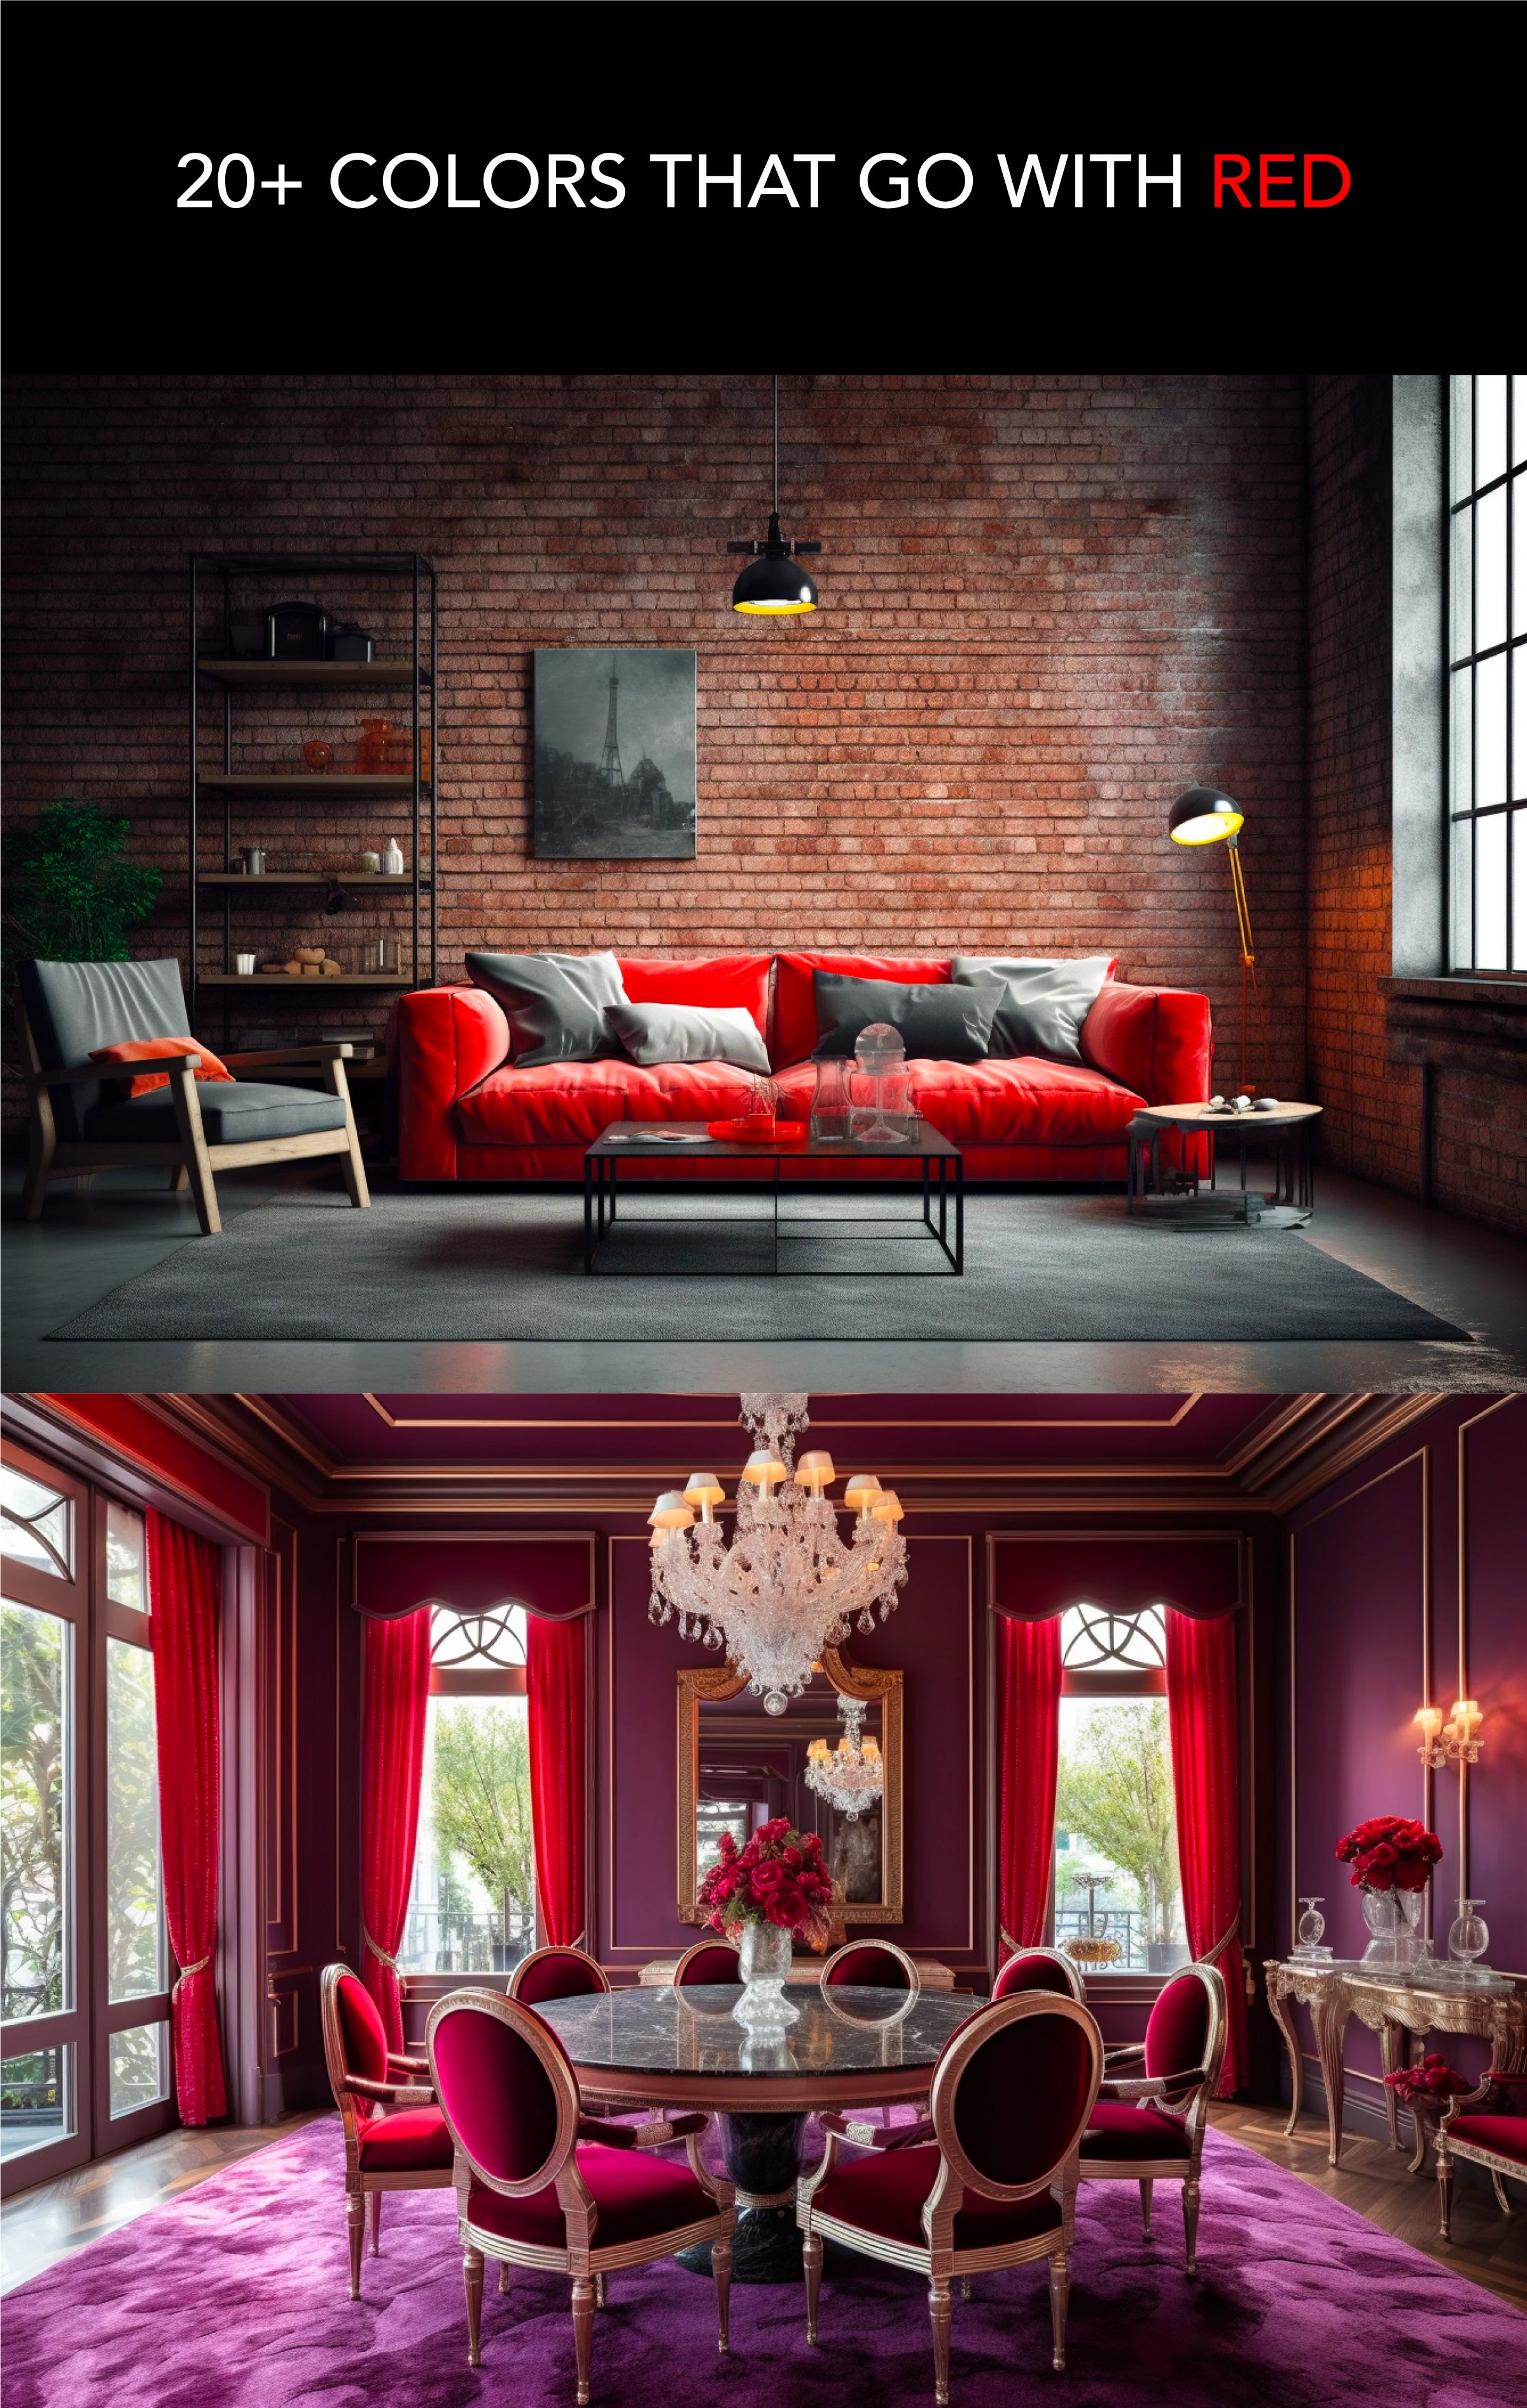 Colors-That-Go-with-Red-Pinterest